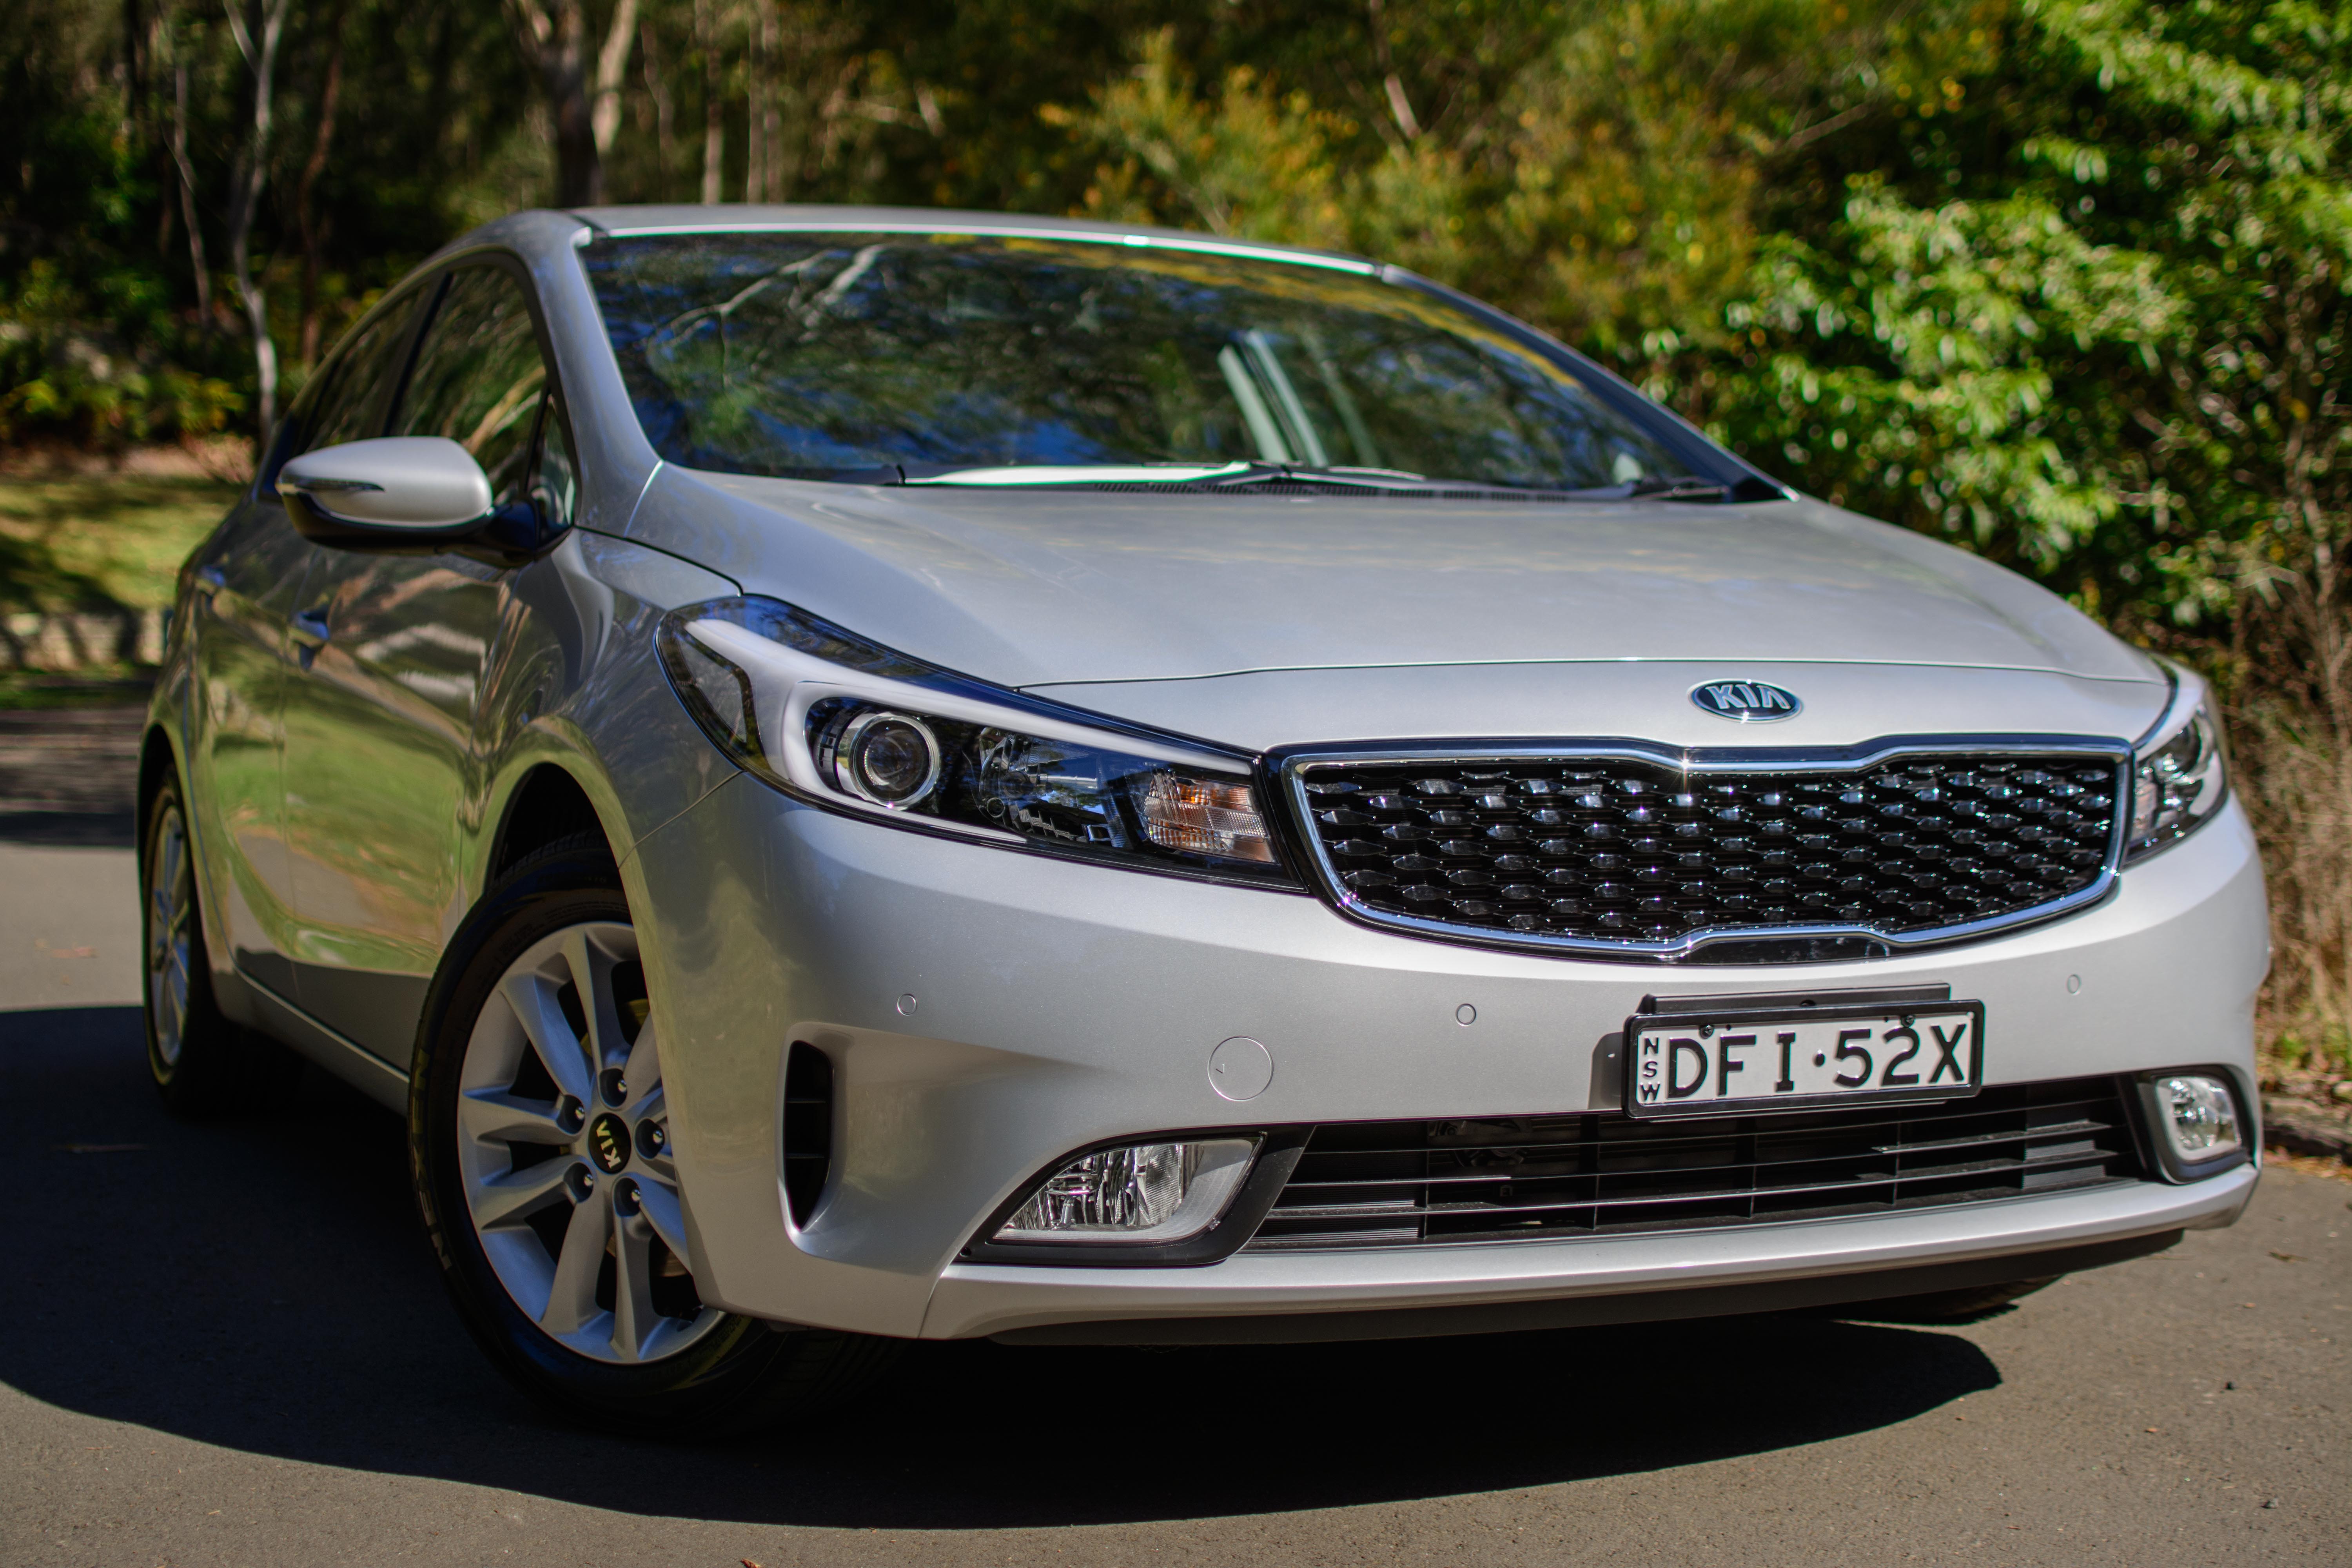 Getting from A to B in the Kia Cerato » EFTM